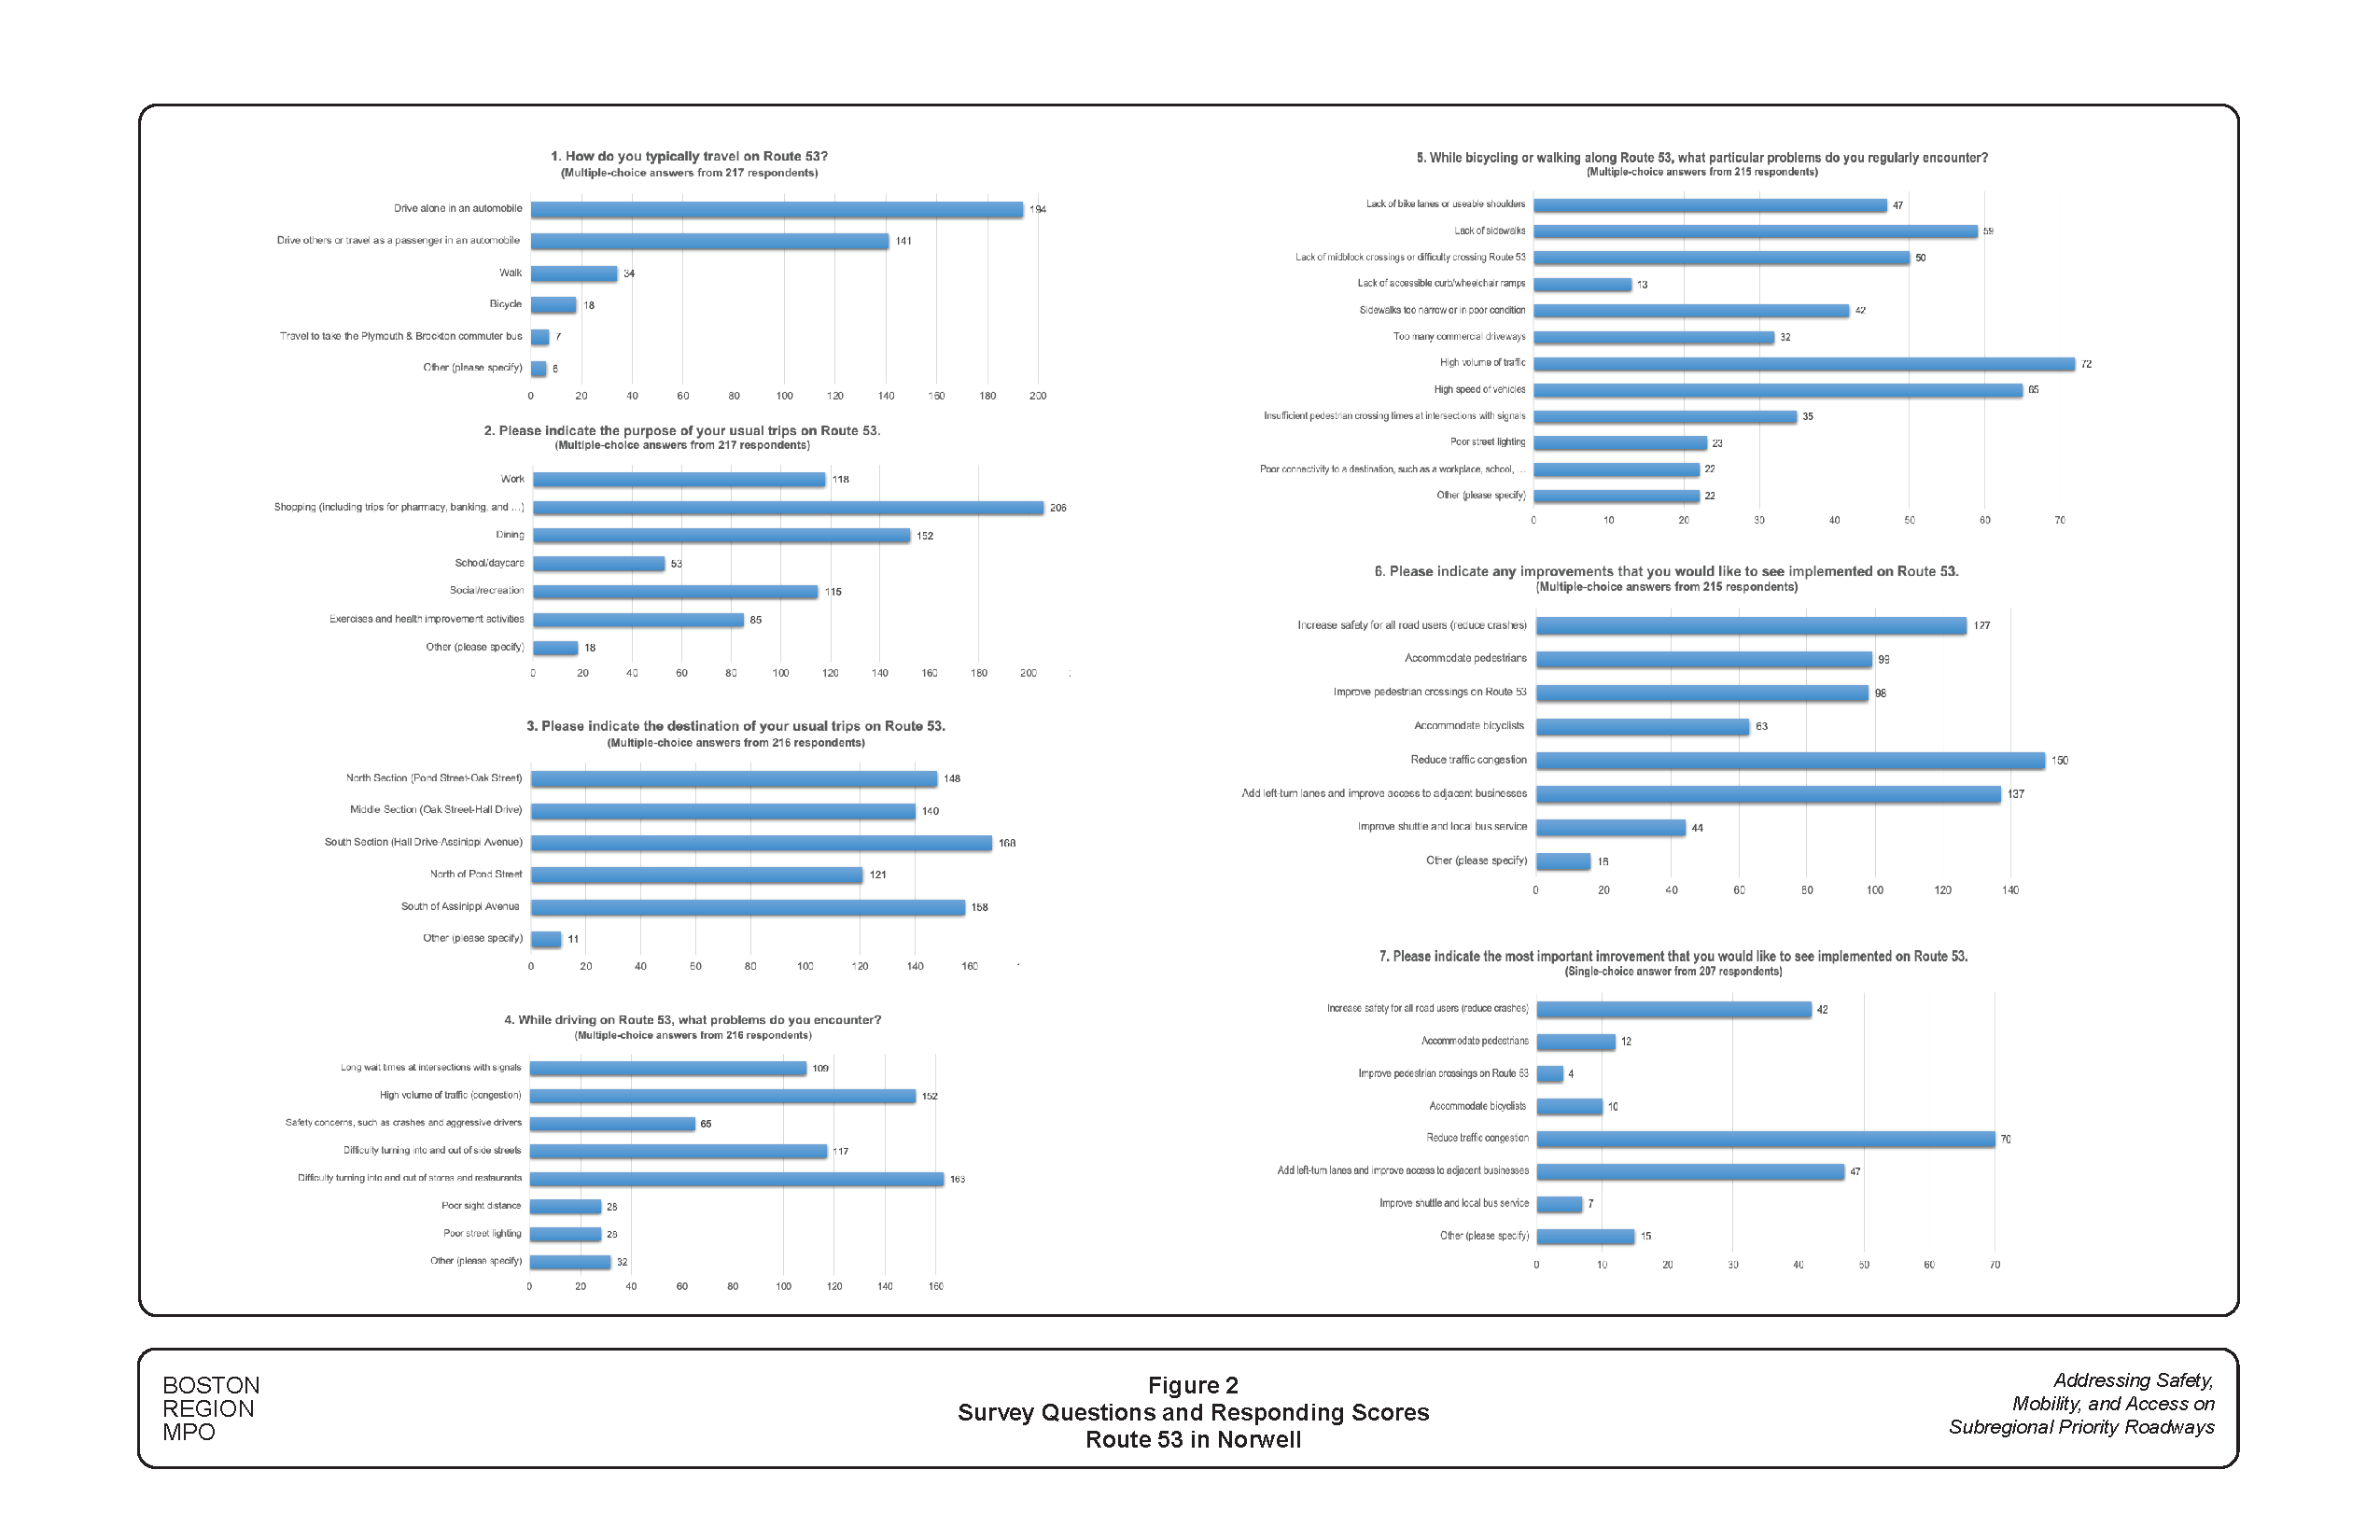 This figure shows seven bar charts that summarize the numbers of responded answers for each of the questions asked in the corridor user survey.